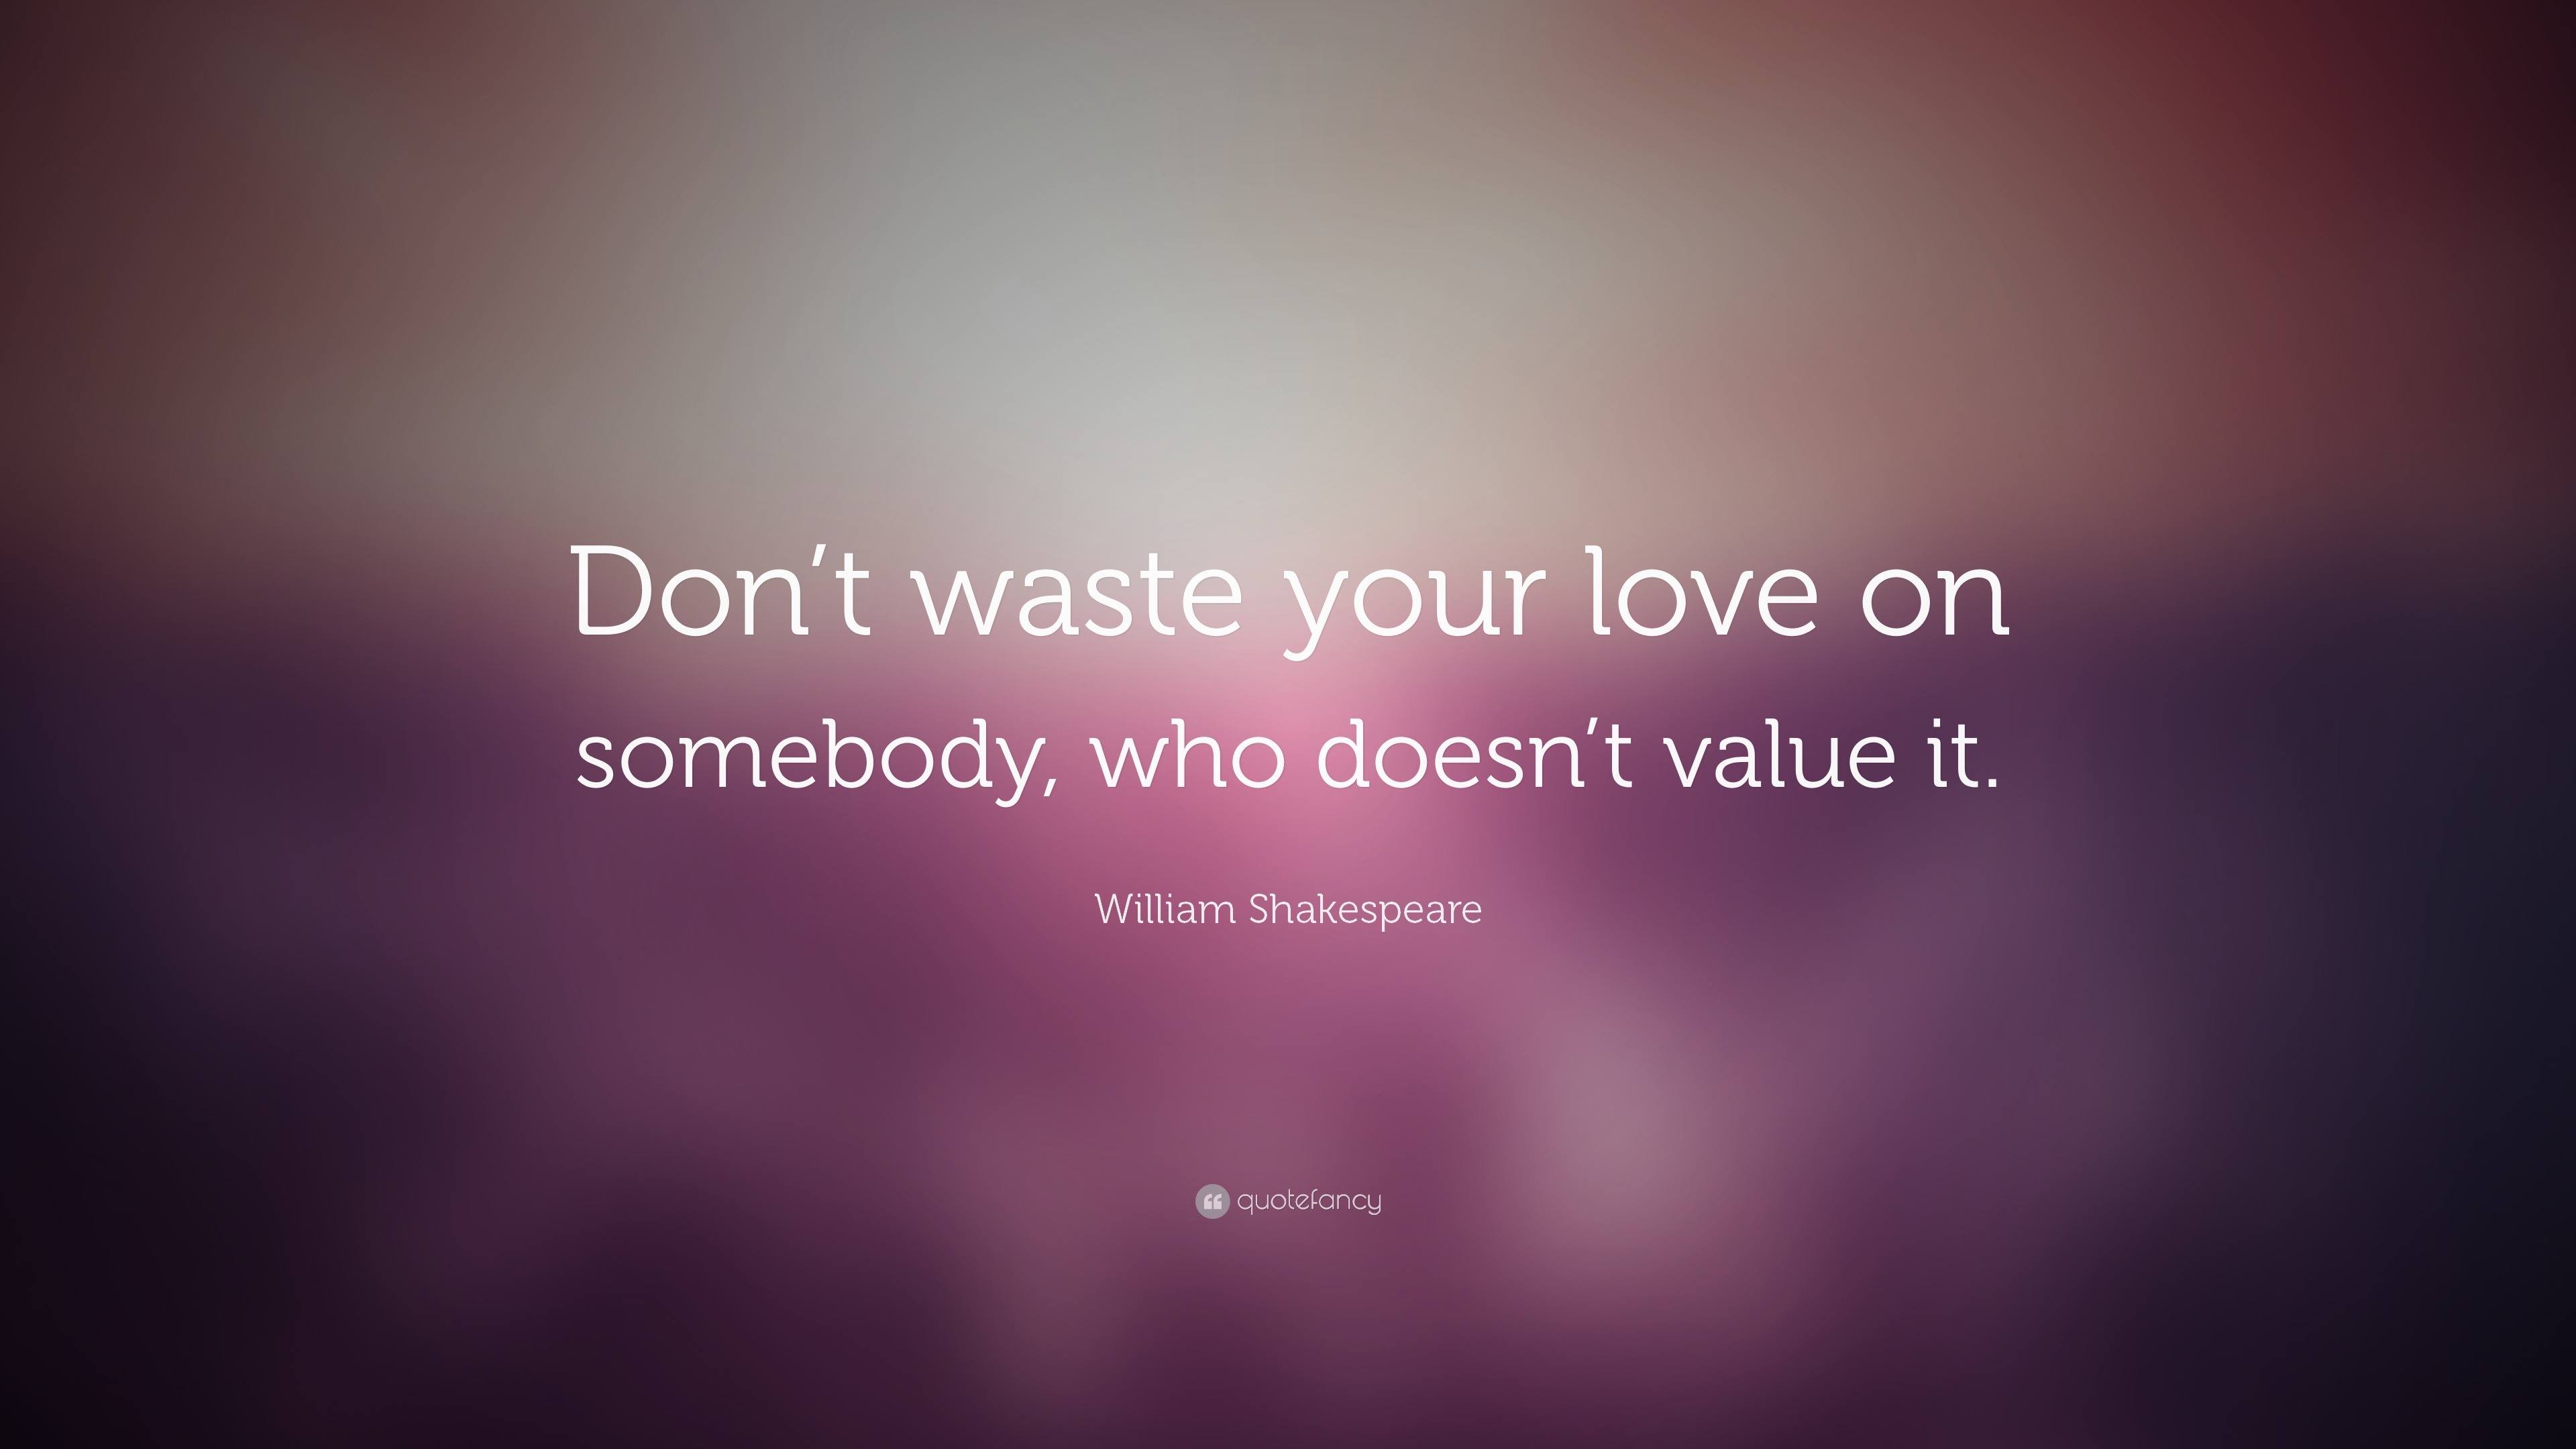 William Shakespeare Quote: “Don’t waste your love on somebody, who ...